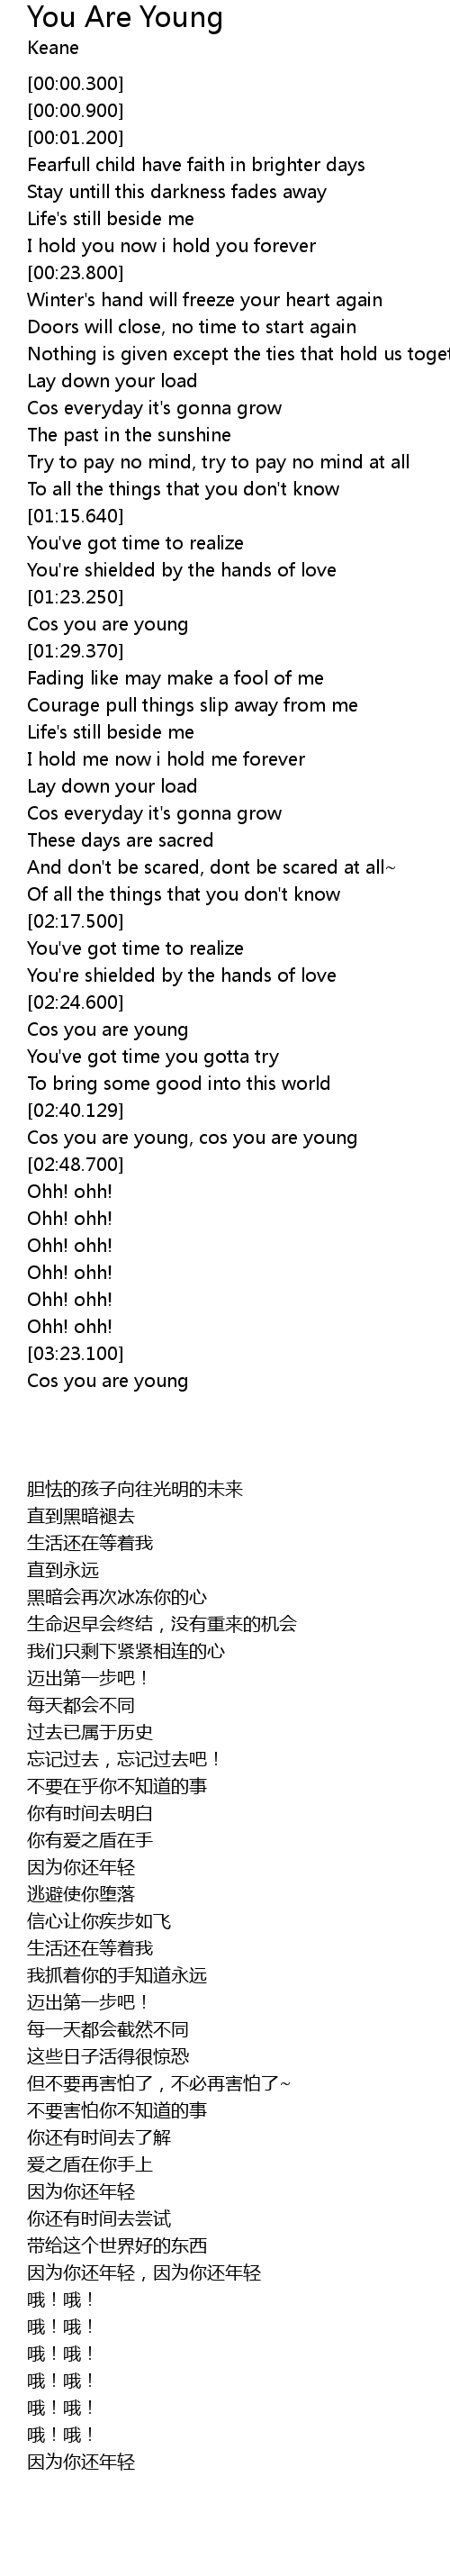 You Are Young Lyrics